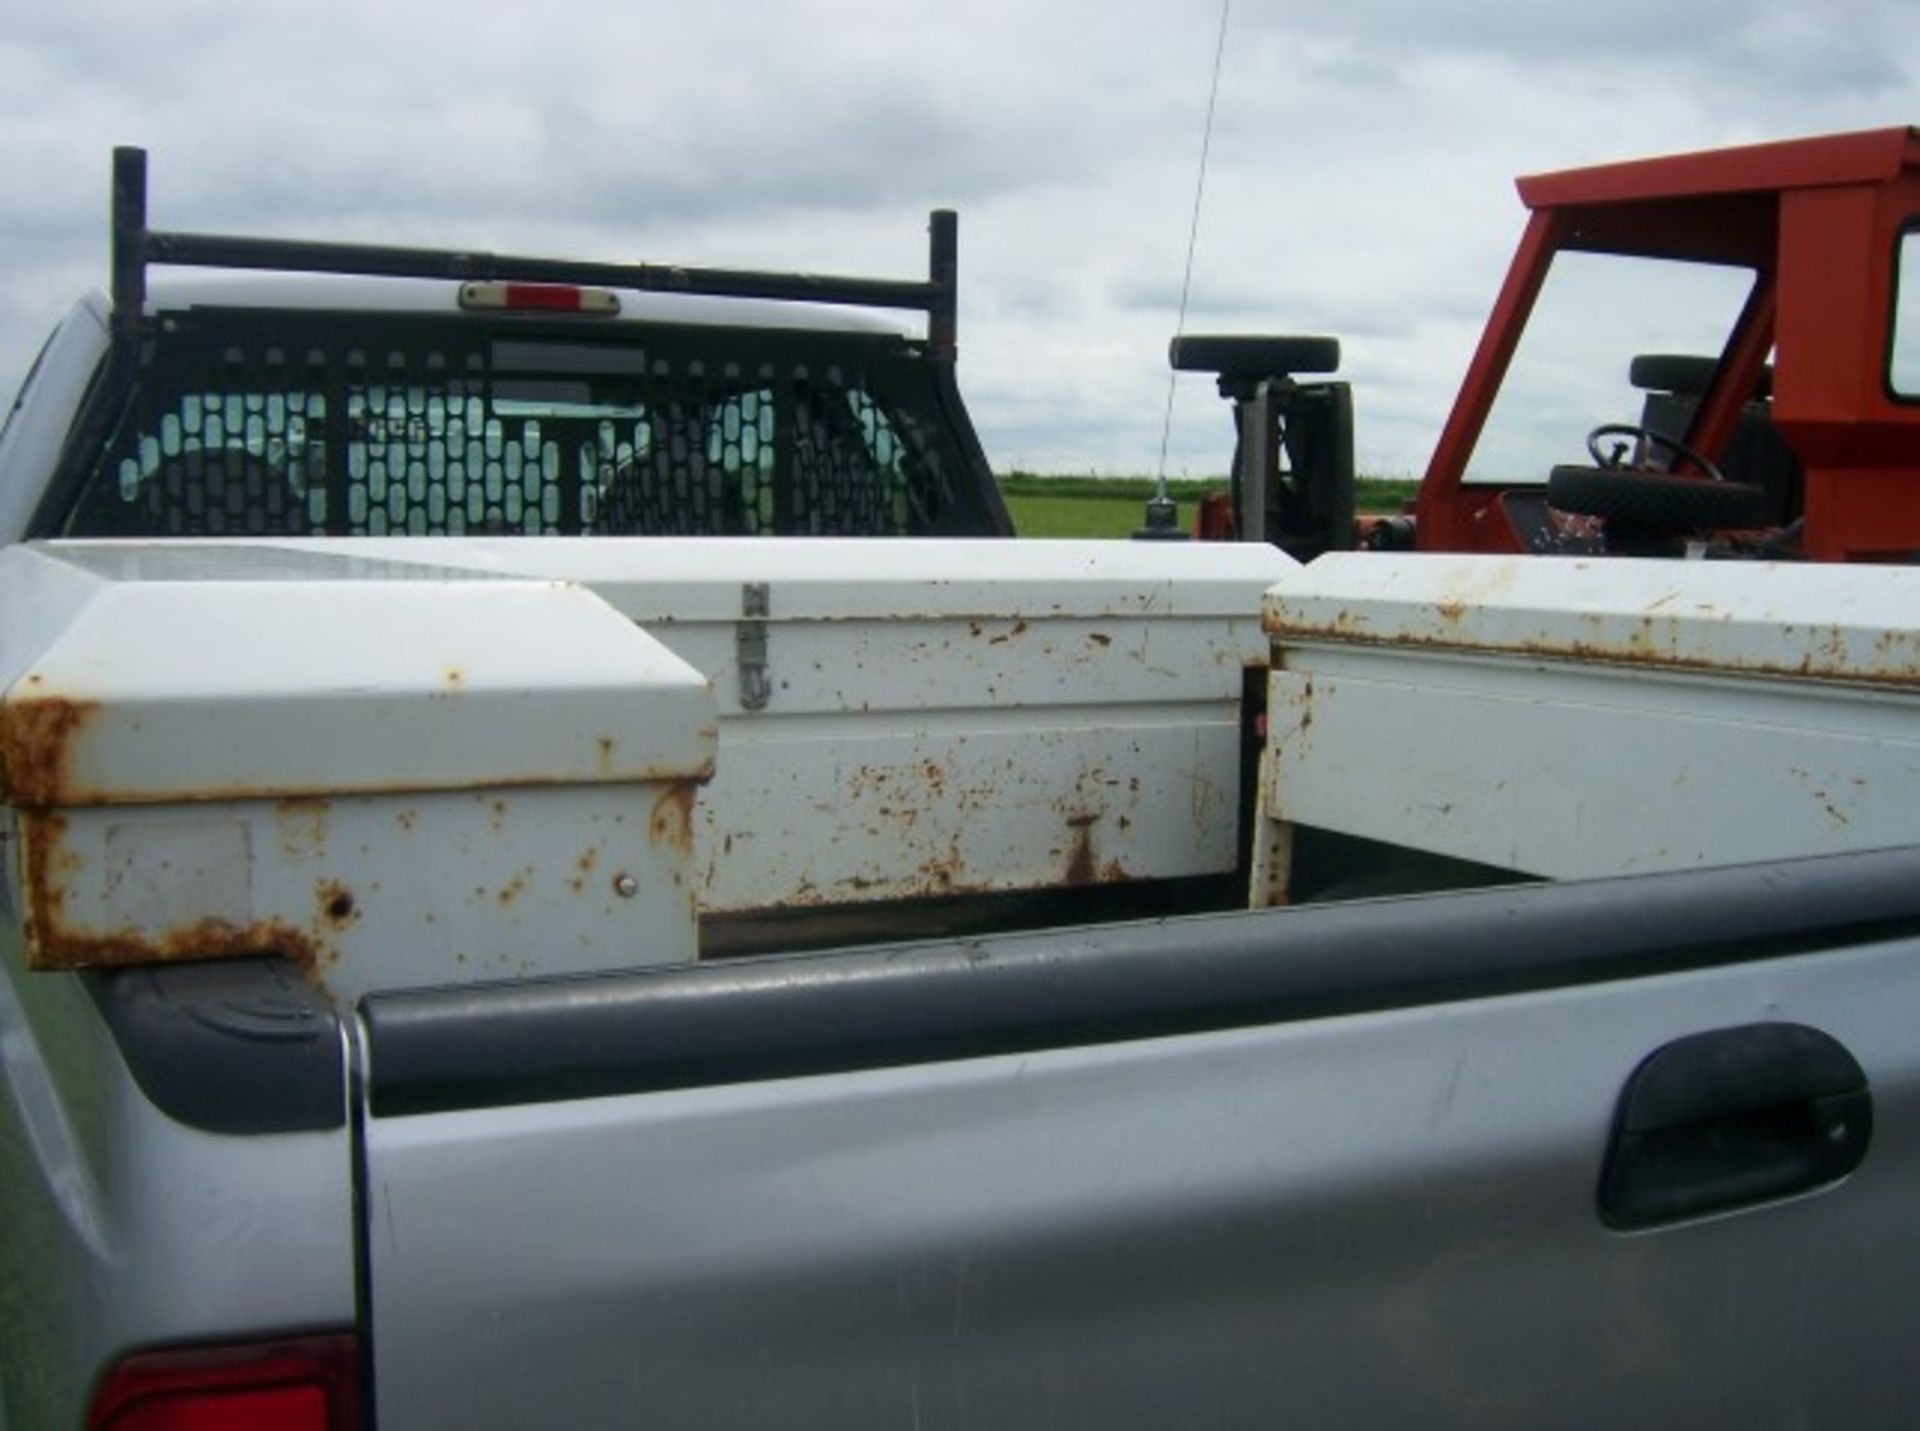 2005 Ford F-350 XL, Super Duty, ext cab, 4x2, 183,113-miles, w/mtd toolboxes, VIN:1FTSX30515EC46518 - Image 3 of 3